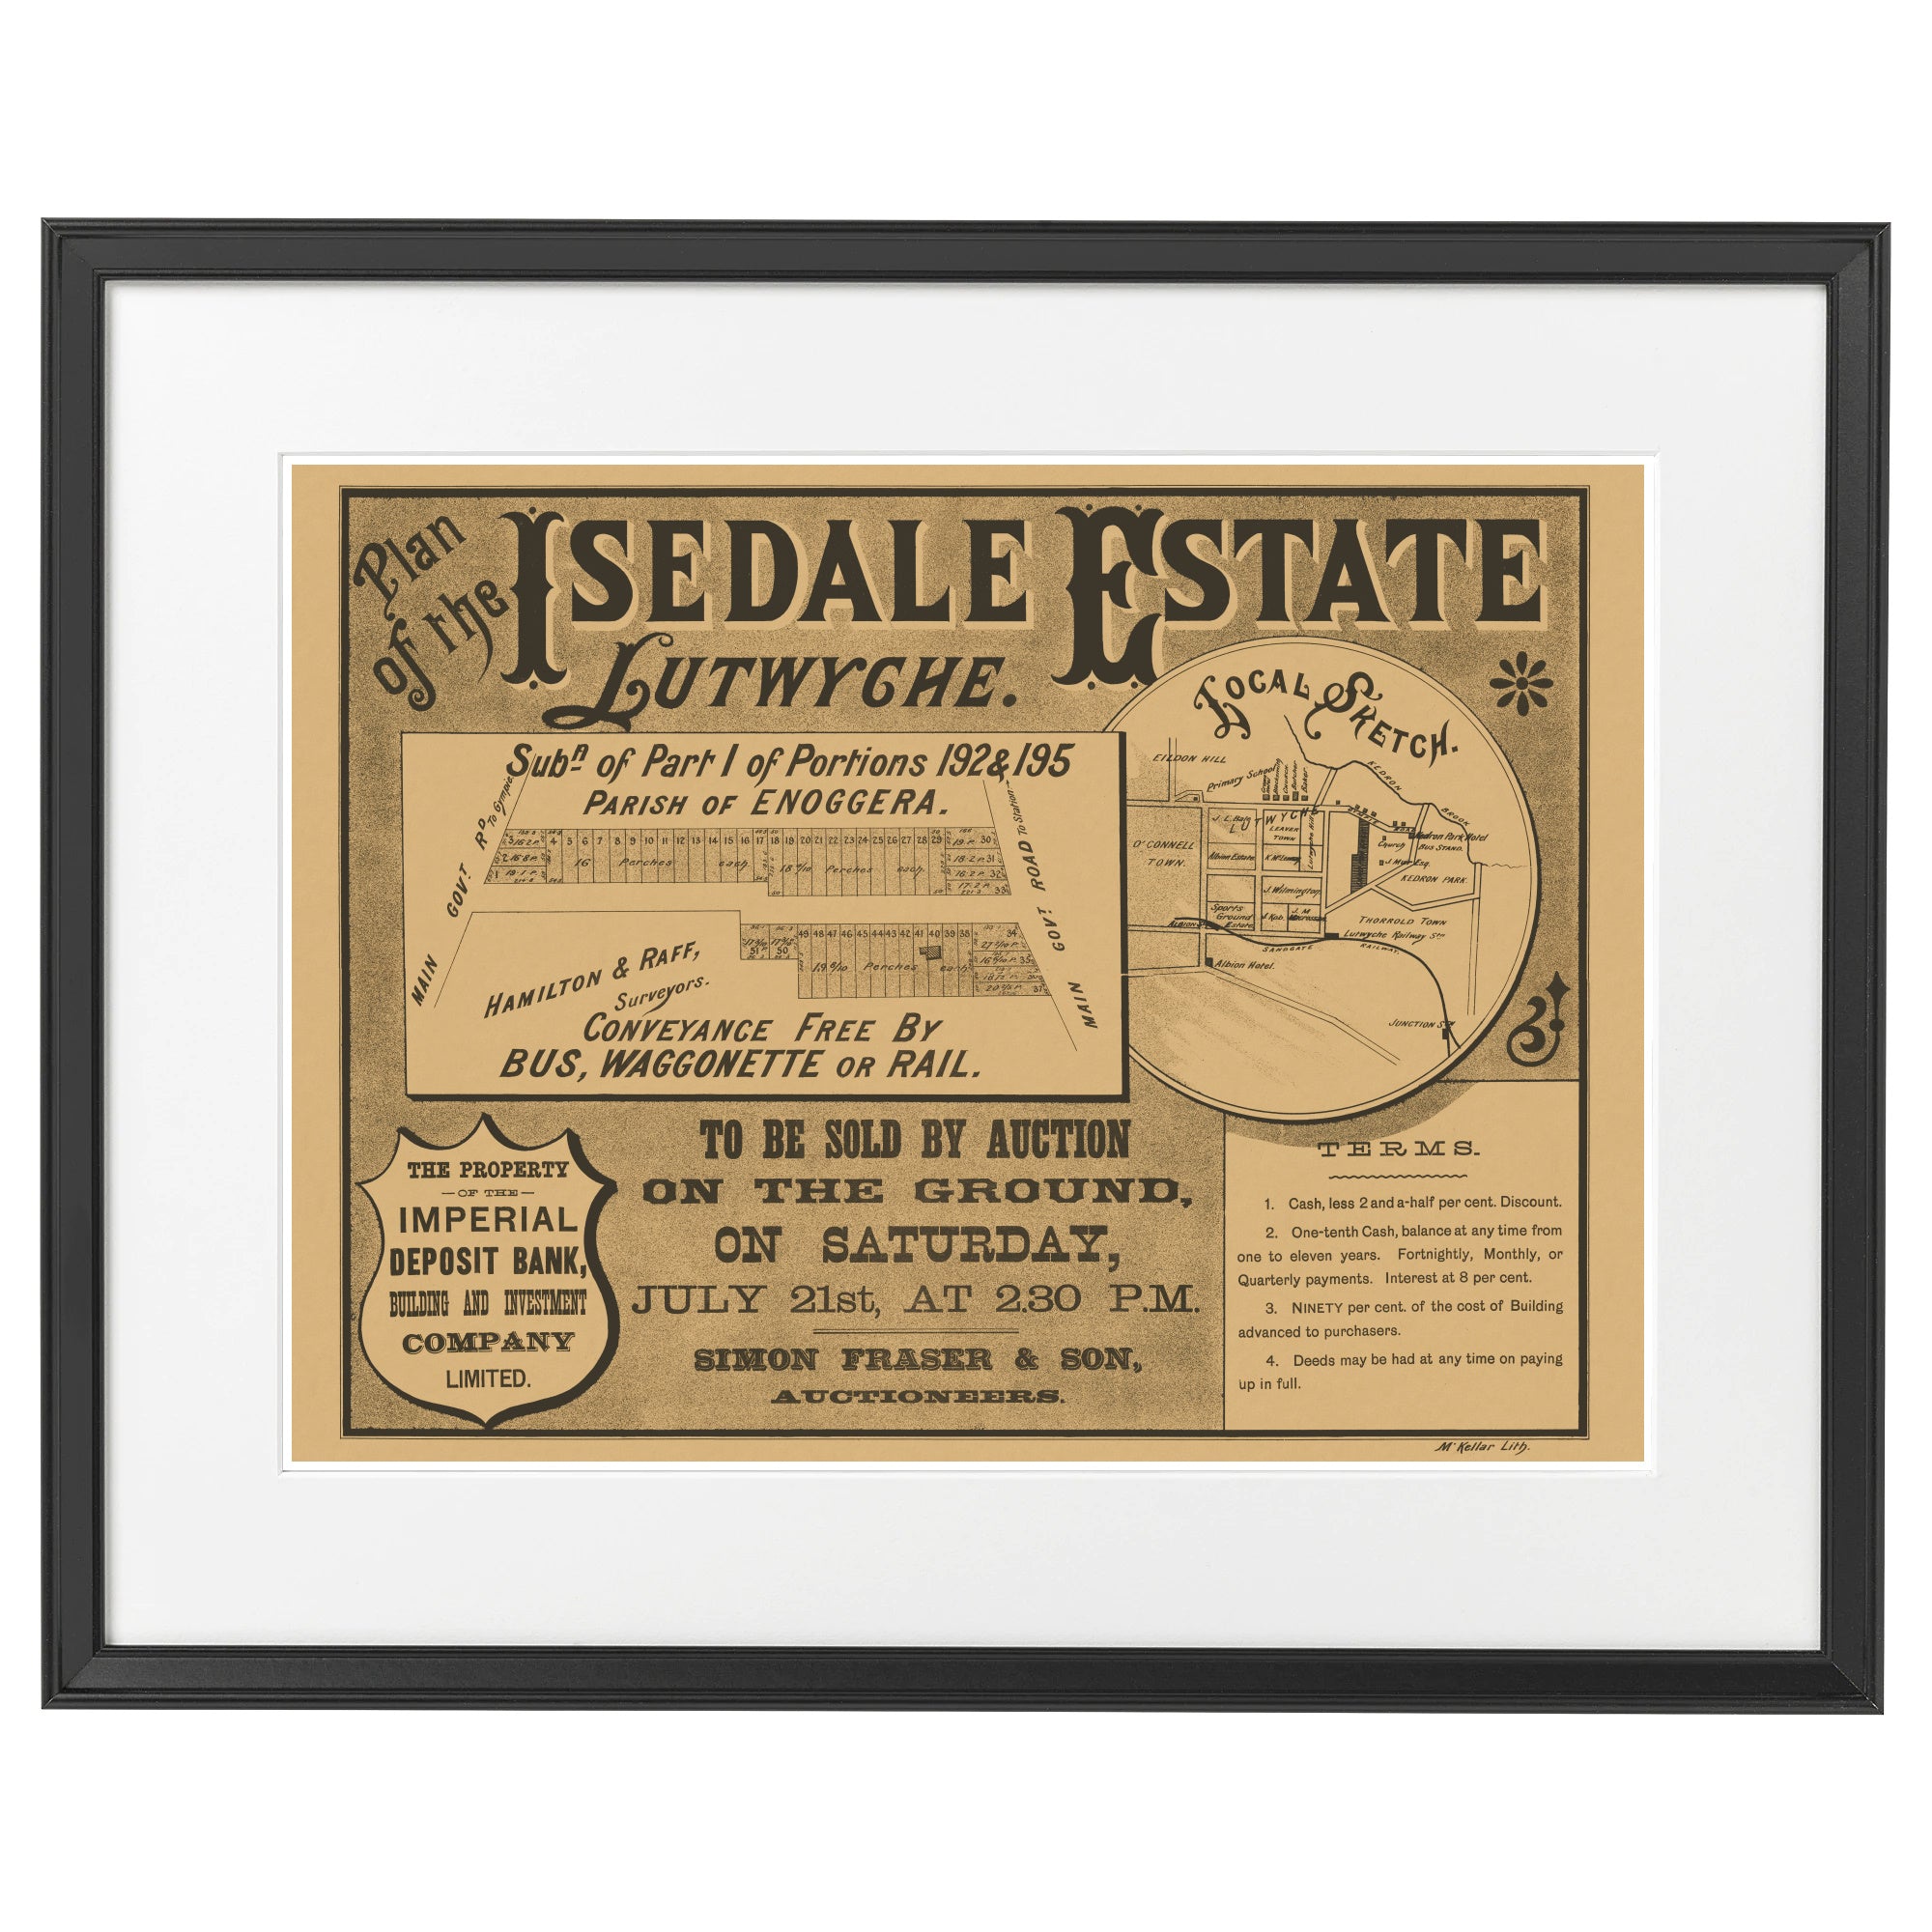 1888 Isedale Estate - 134 years ago today